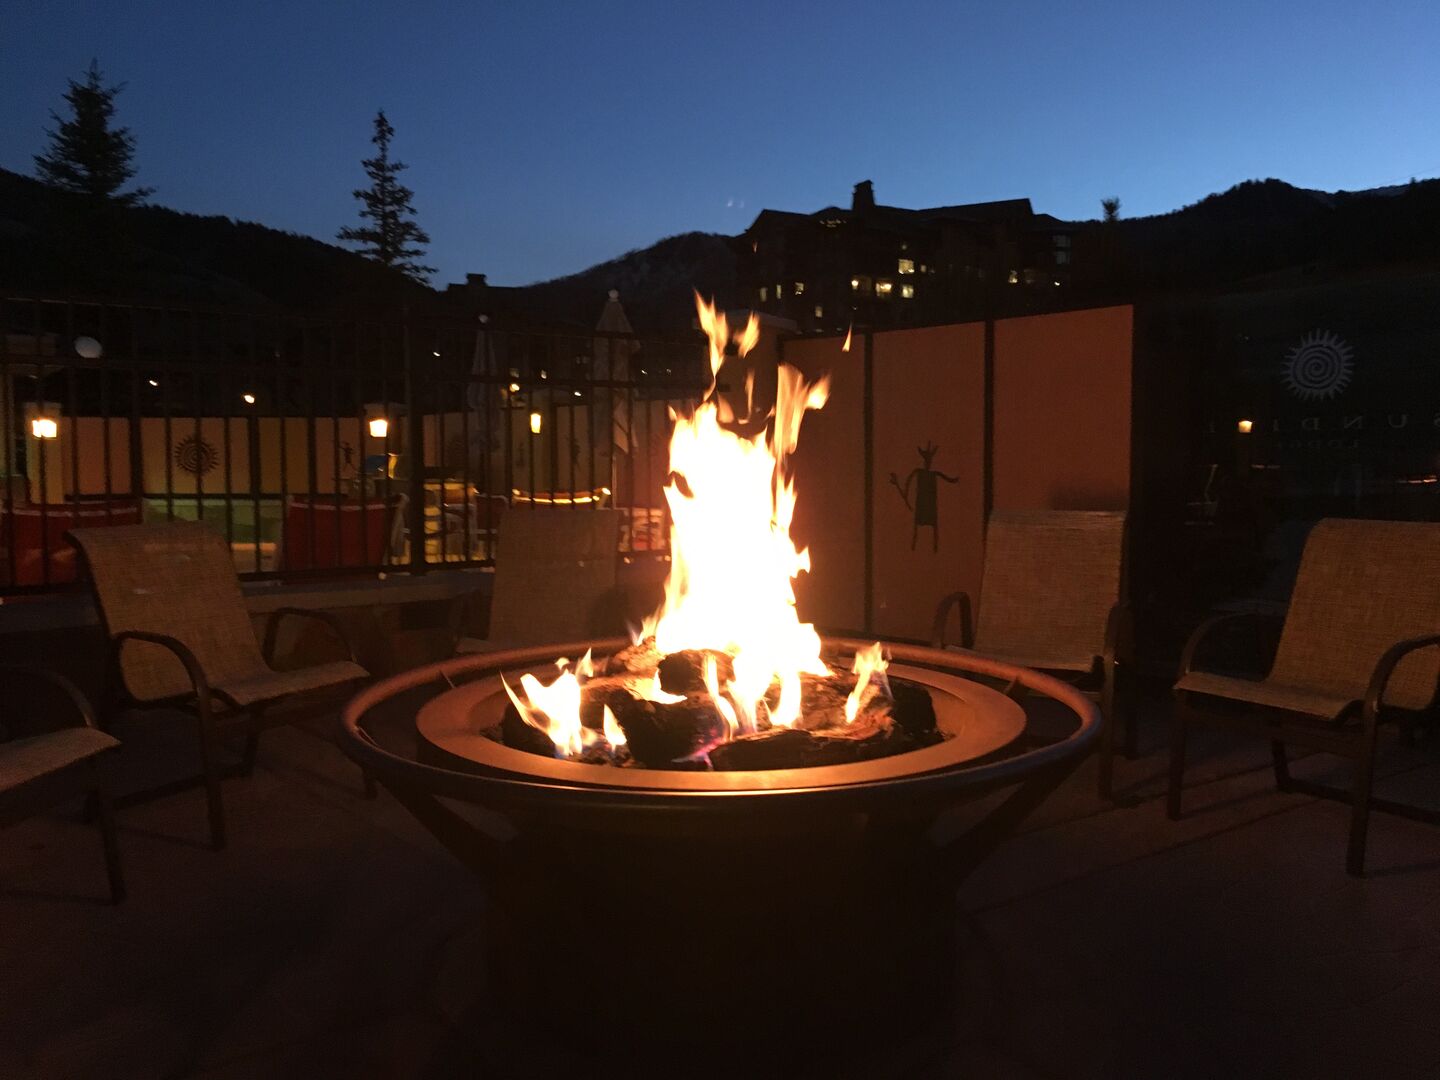 One of two relaxing fire pits on property